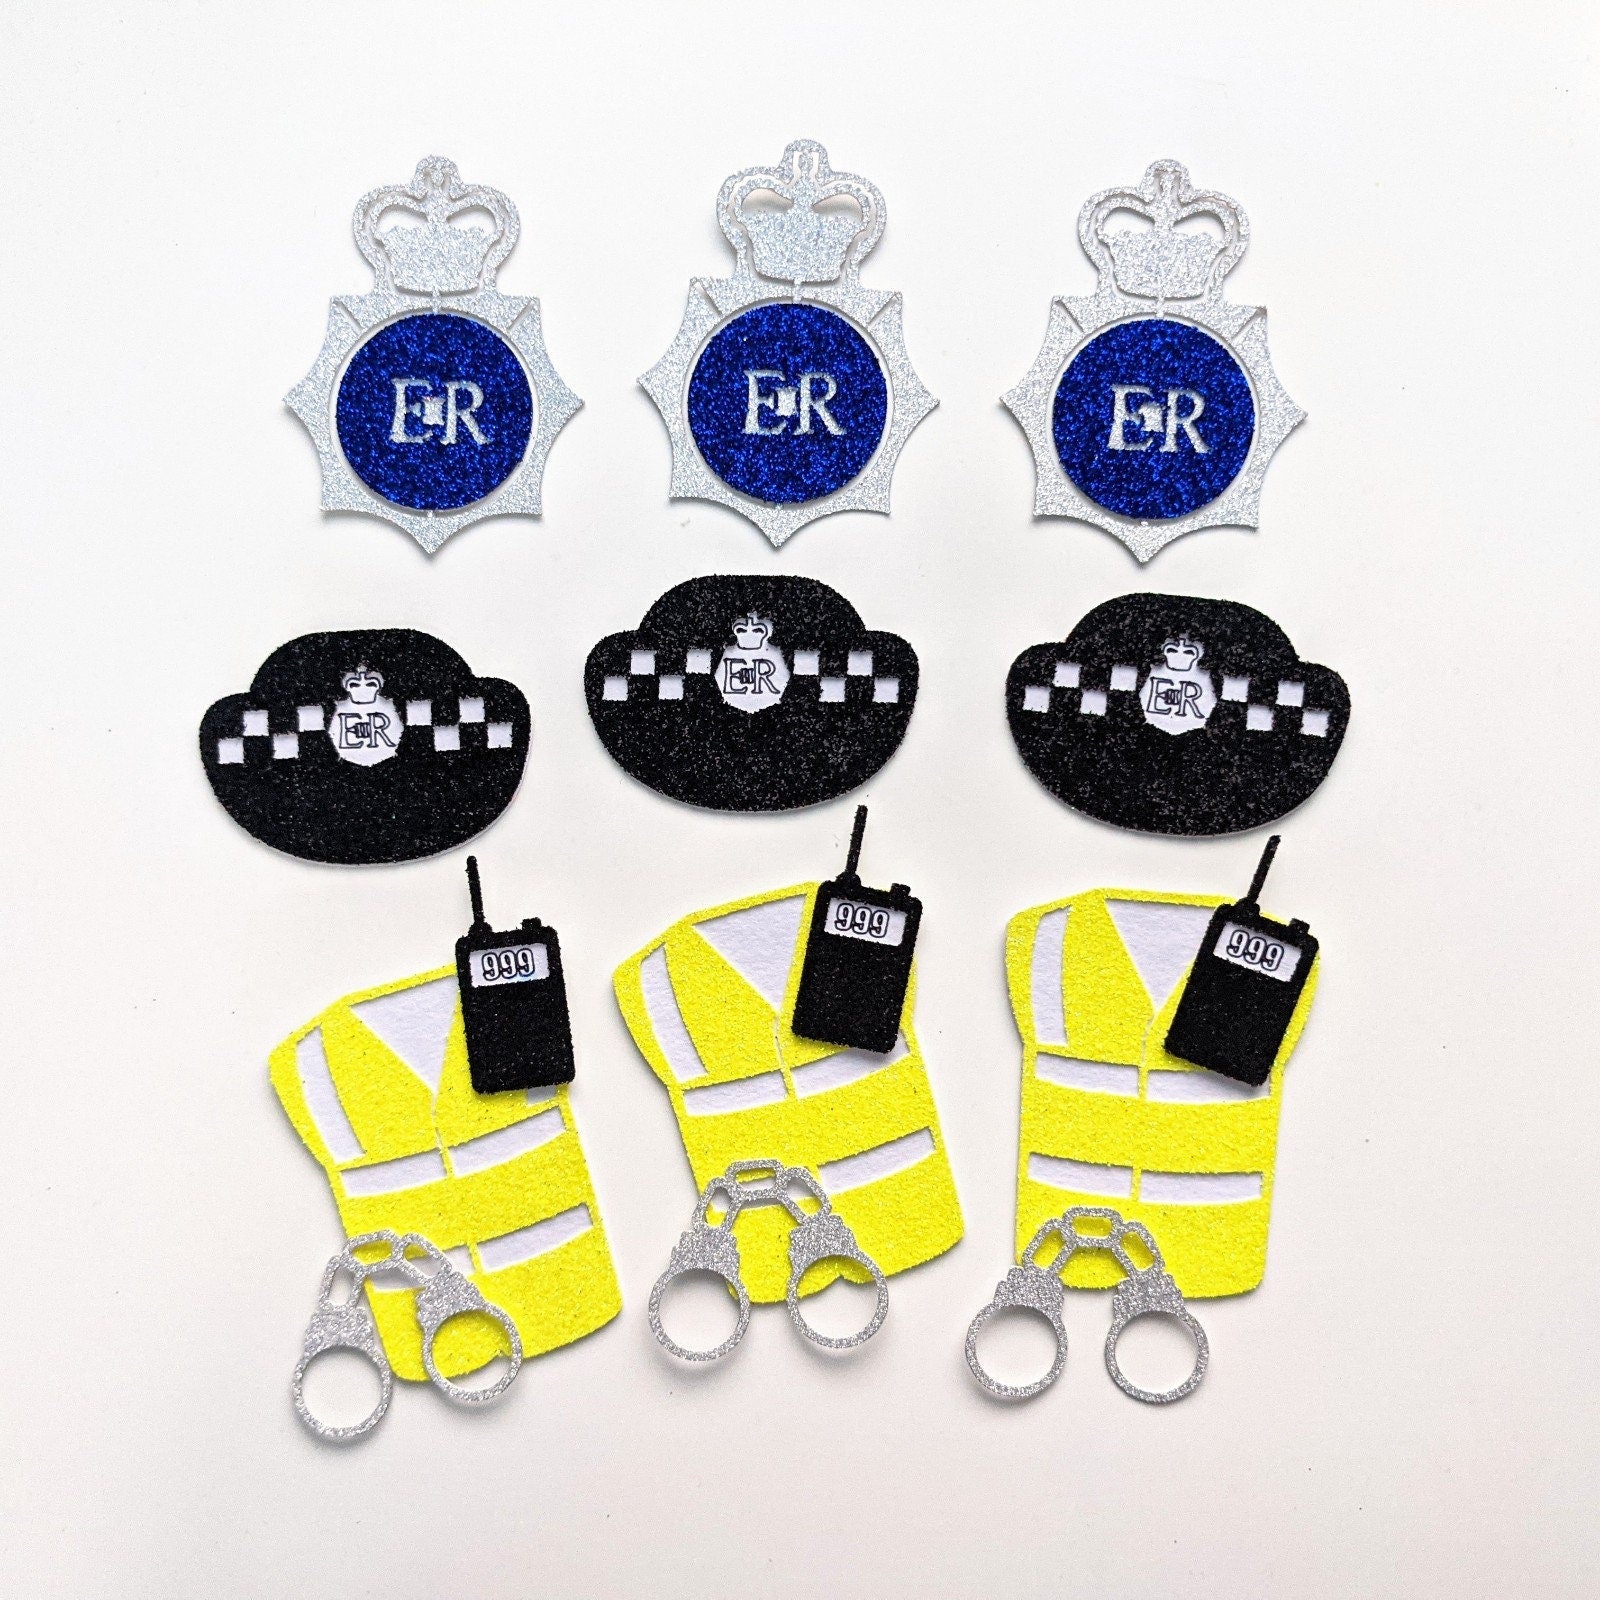 Police Themed Cupcake Toppers Badges, Cuffs, Hats Free Delivery NON EDIBLE